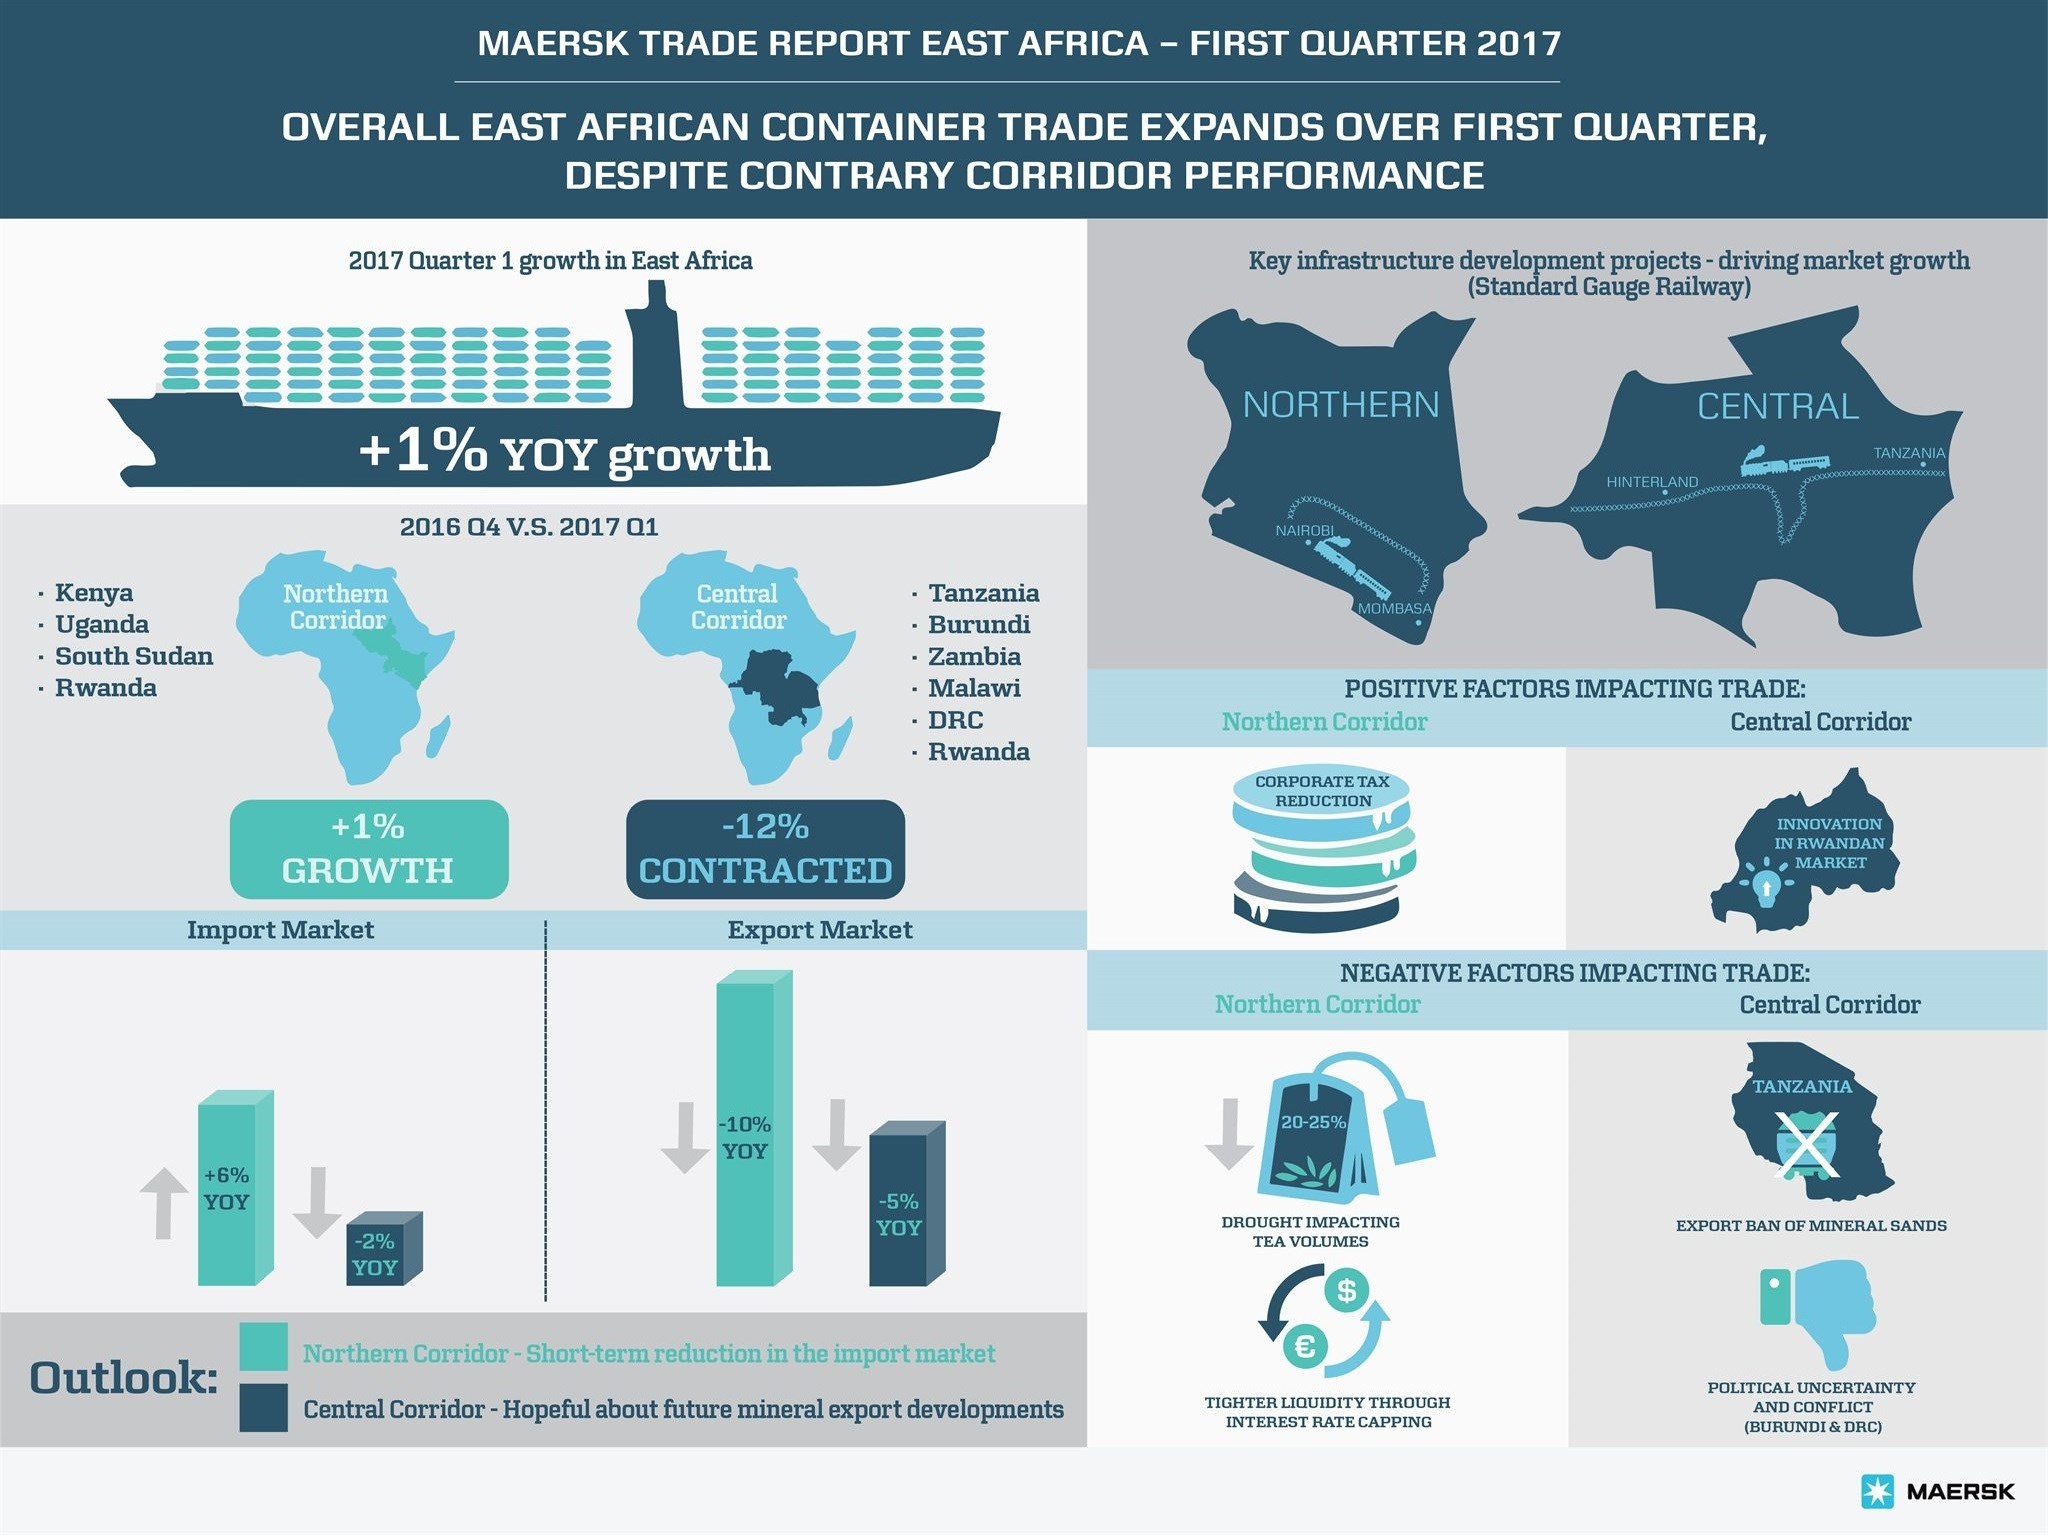 East Africa containerised trade volumes grow 1% Q1 2017